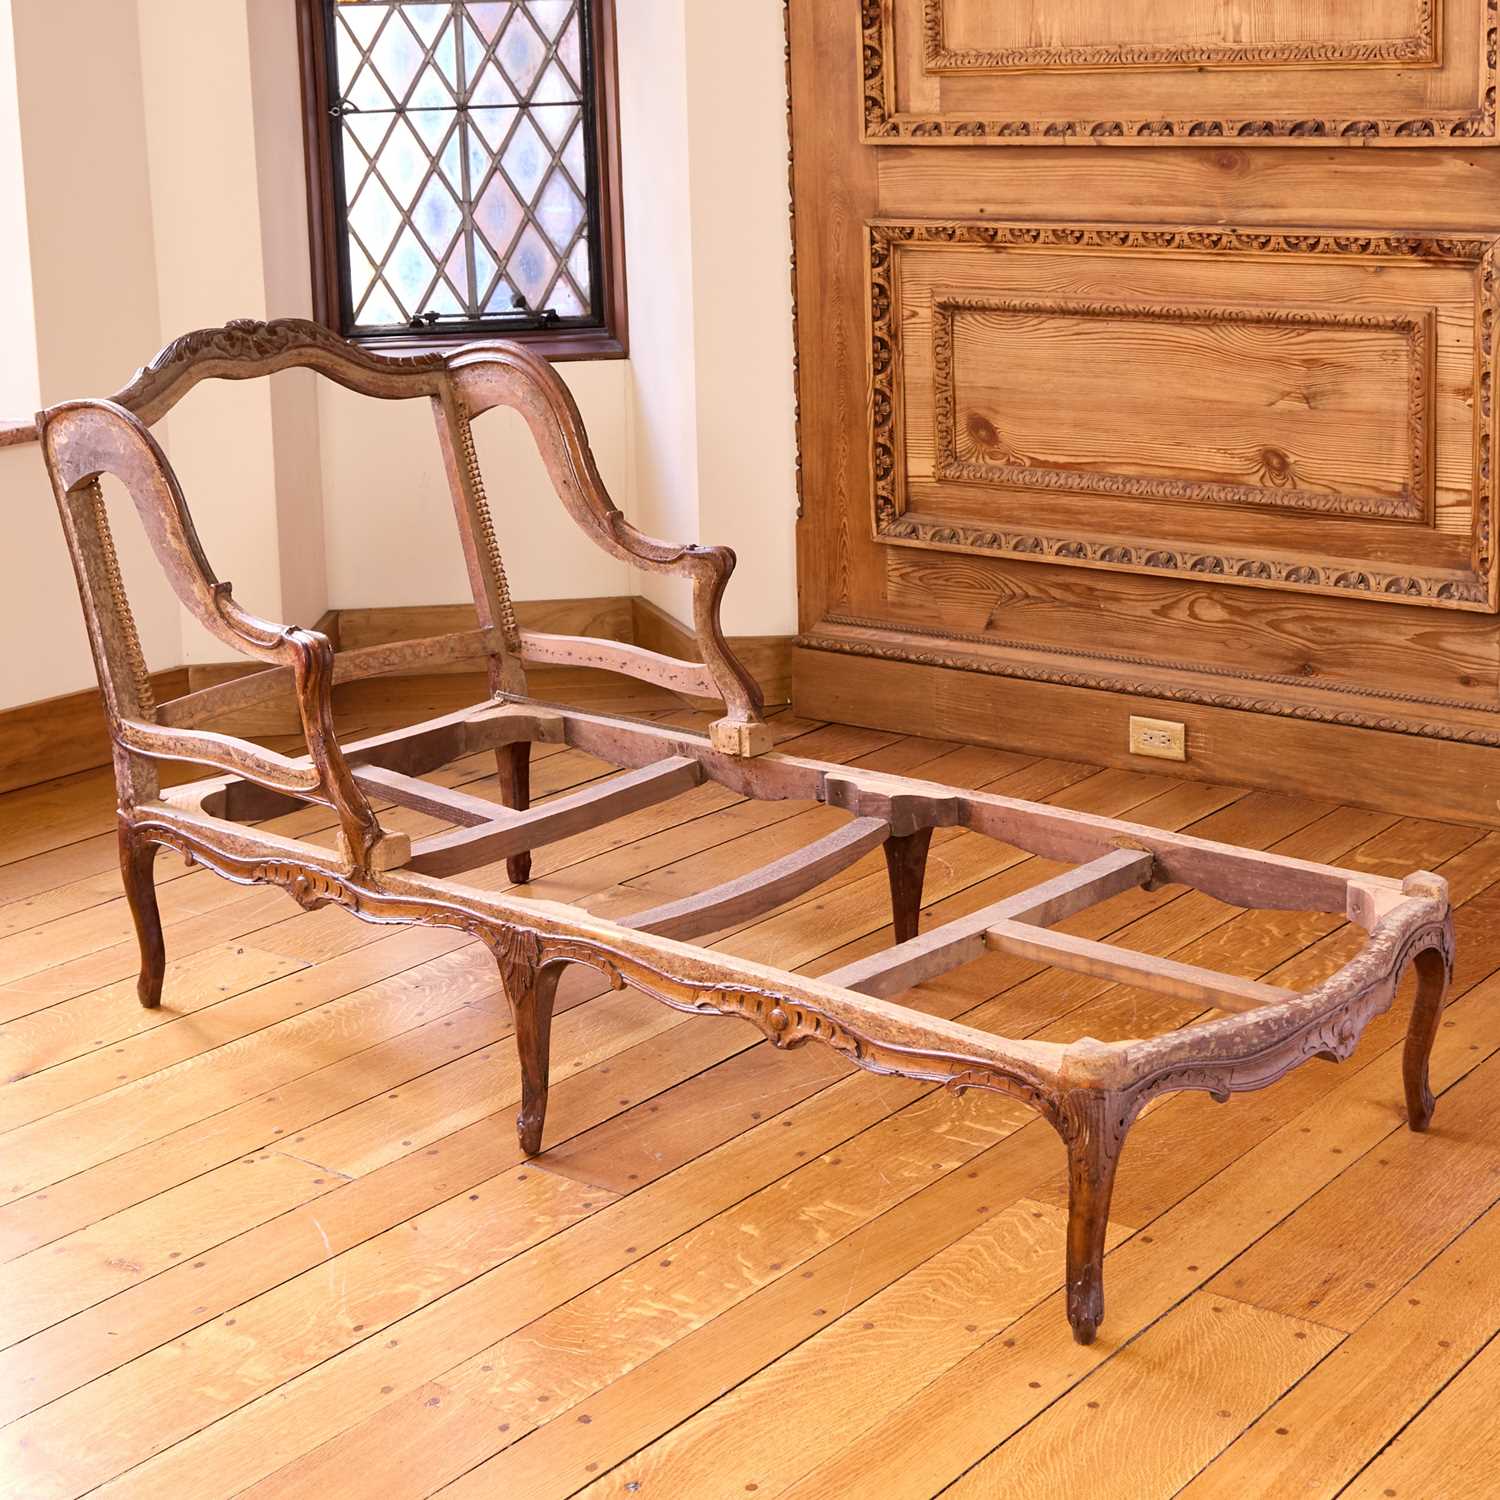 Lot 89 - Louis XV Carved Walnut Chaise Longue Frame